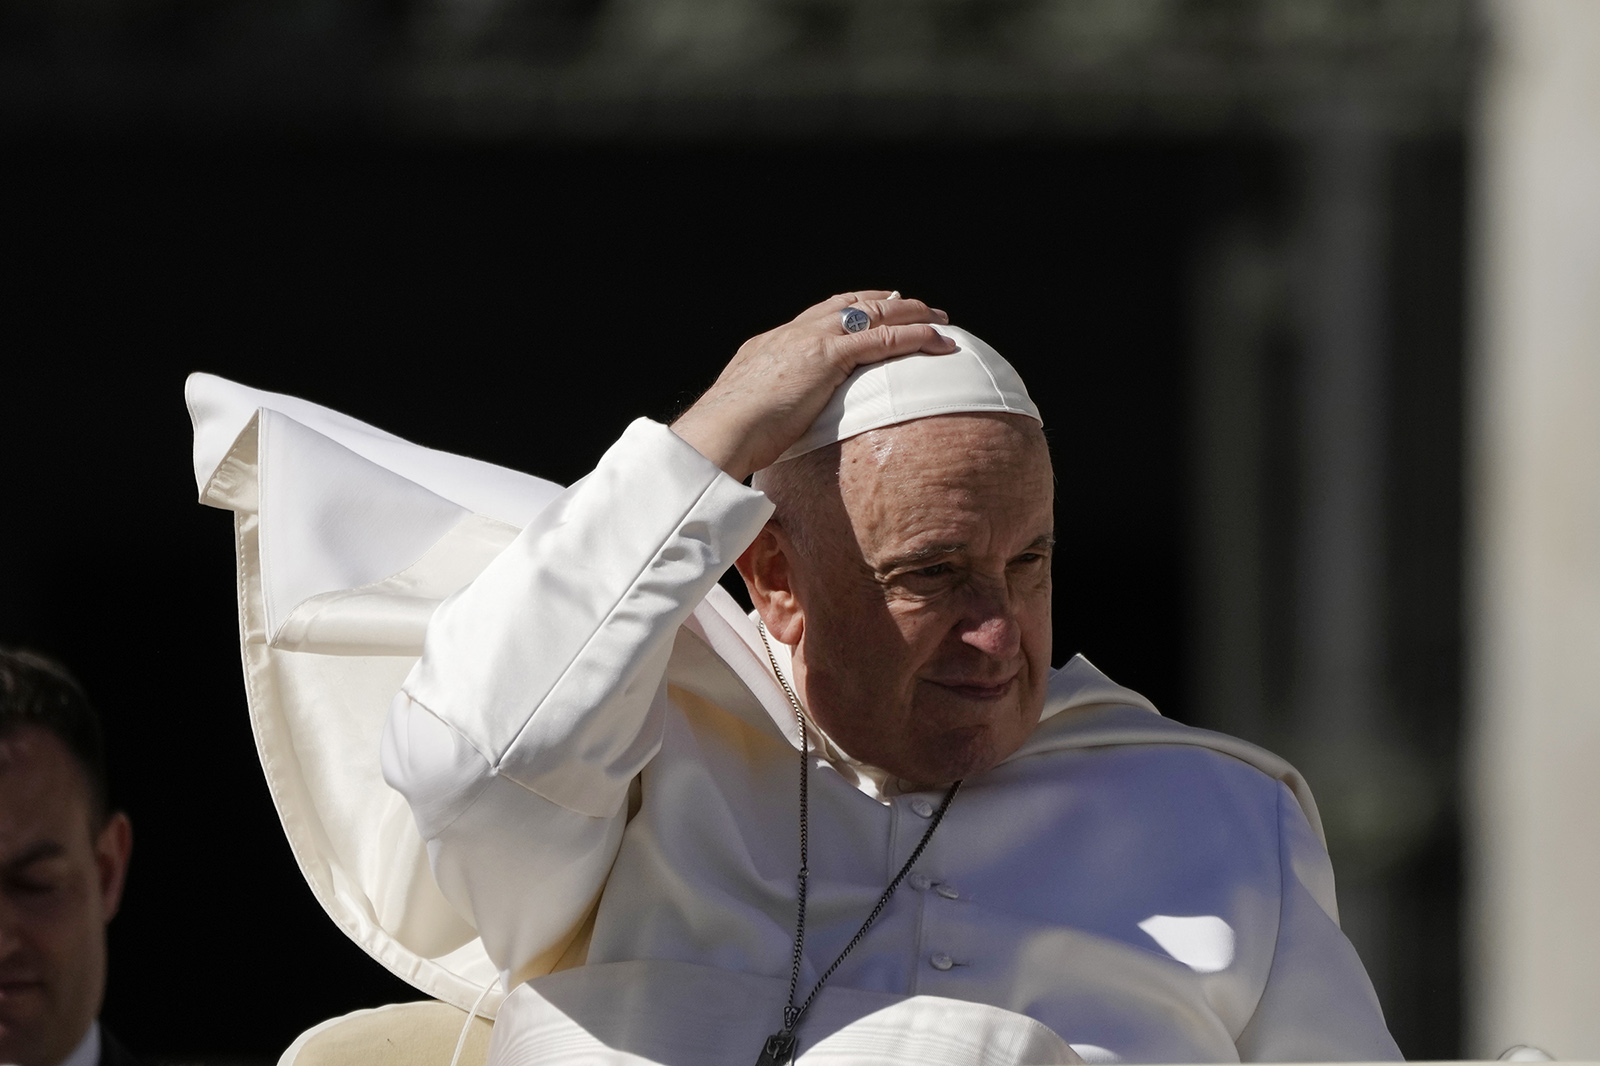 Pope Francis adjusts his skull cap at the end of his weekly general audience in St. Peter's Square at The Vatican, Wednesday, March 15, 2023. Francis passed his 10th anniversary as pope on March 13. (AP Photo/Alessandra Tarantino)